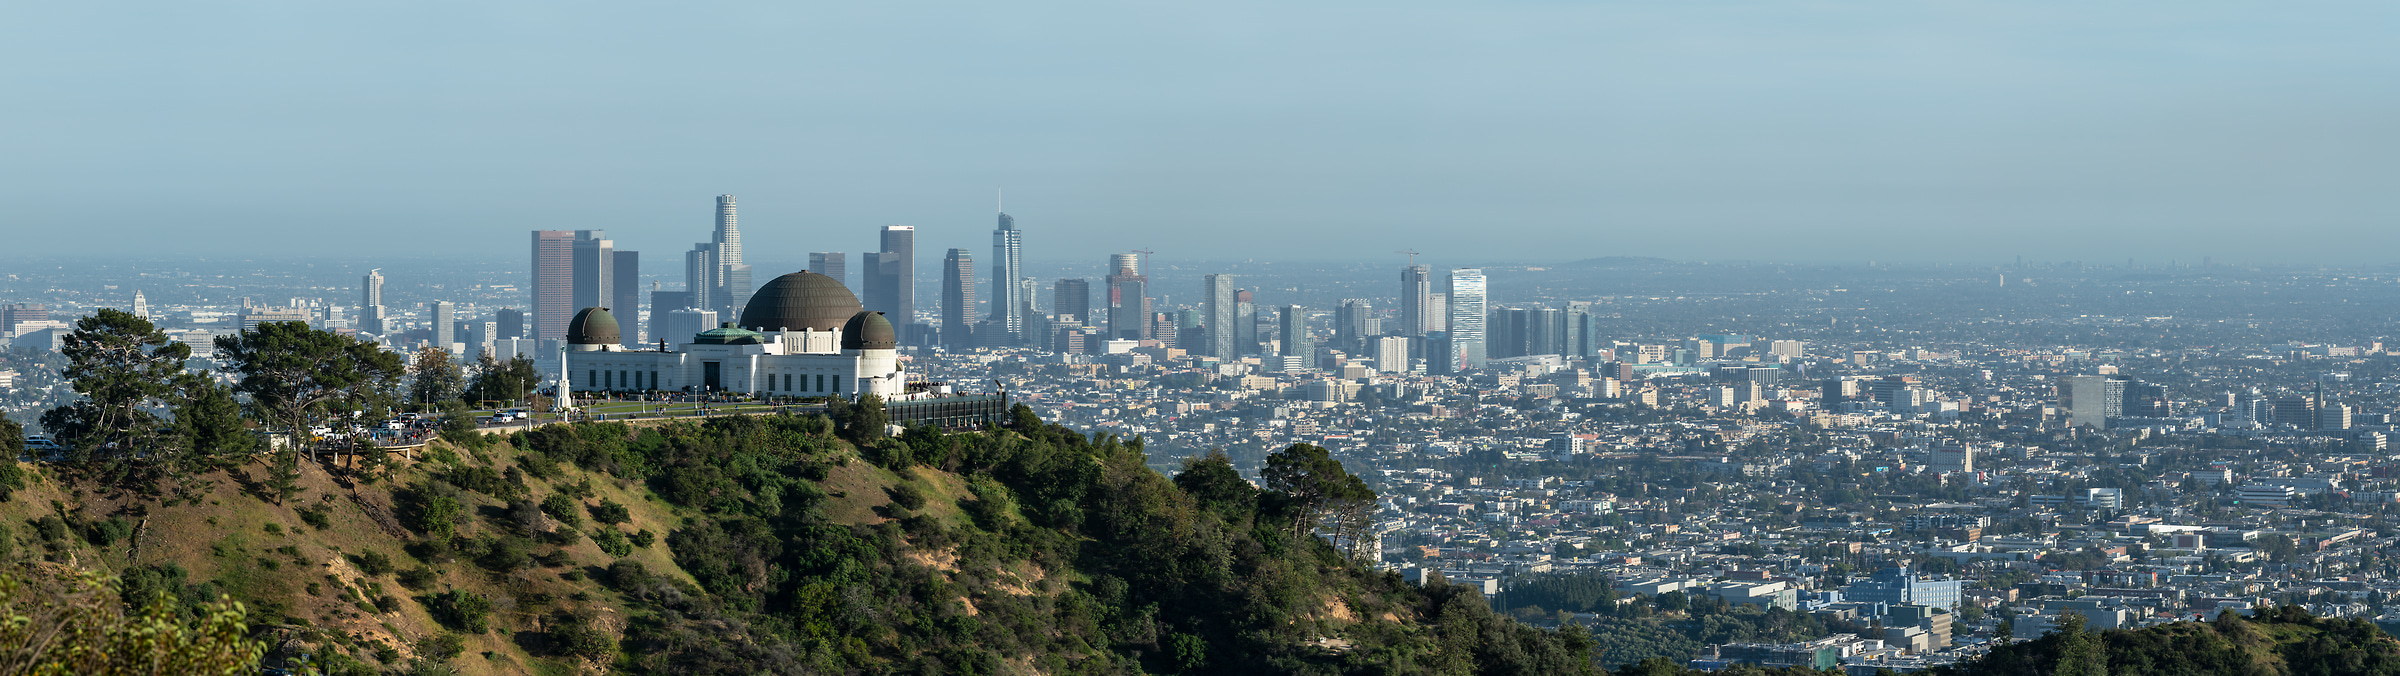 427 megapixels! A very high resolution, large-format VAST photo print of Griffith Observatory in front of the Los Angeles skyline; panorama photograph created by Greg Probst in Griffith Park, Los Angeles.